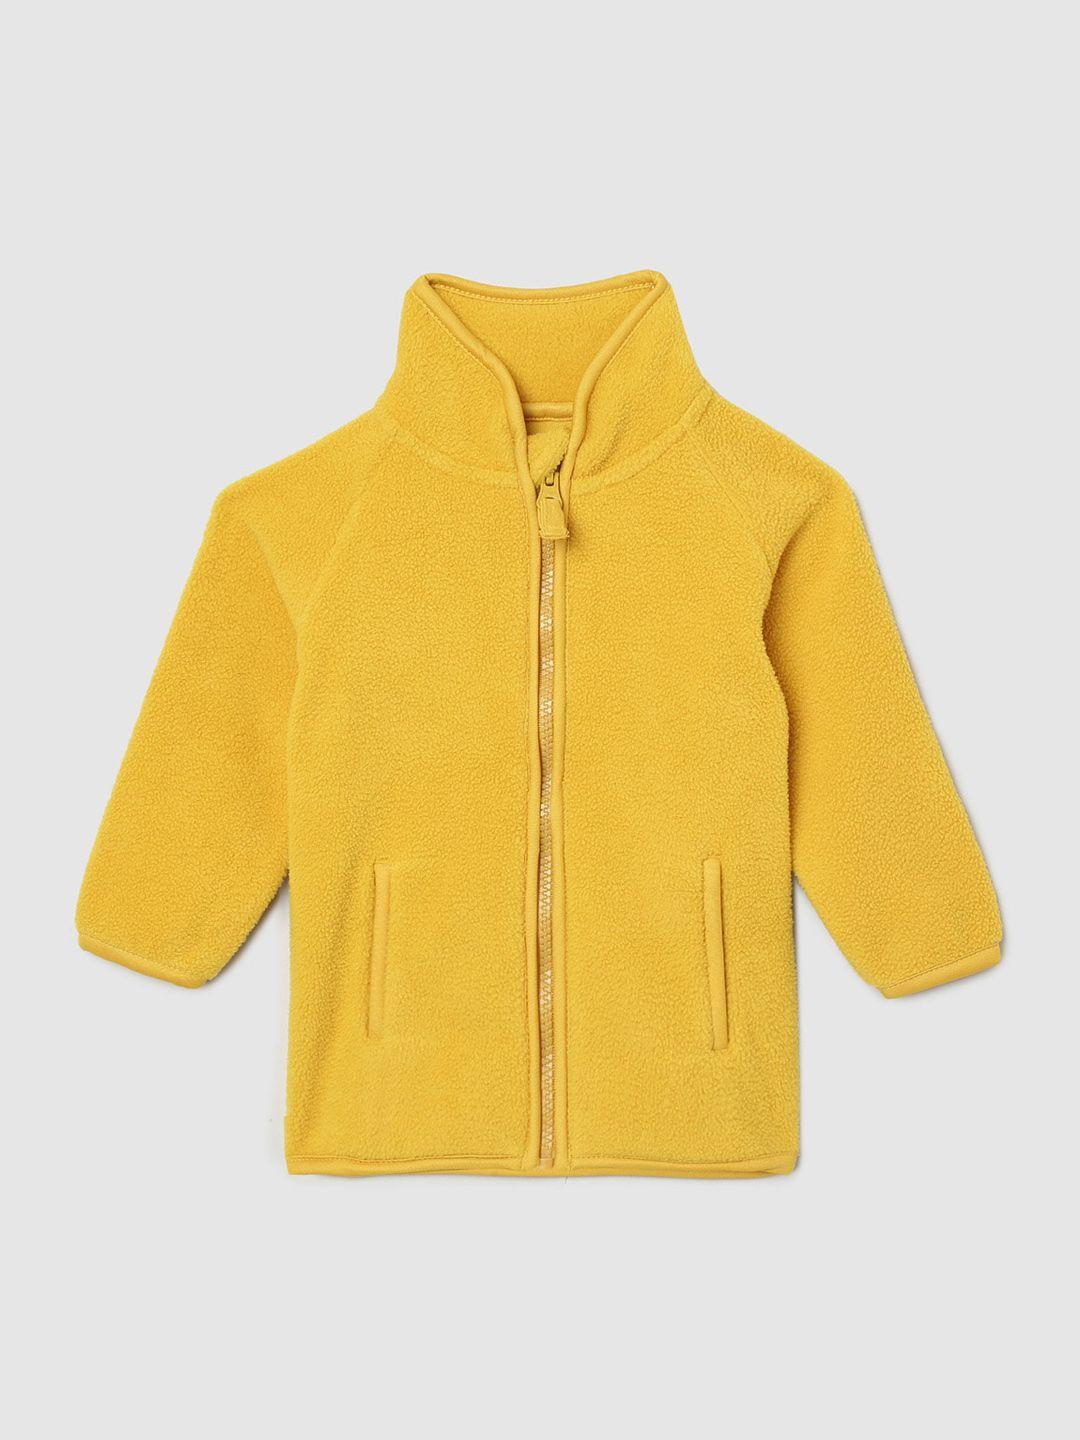 max boys yellow solid sweater